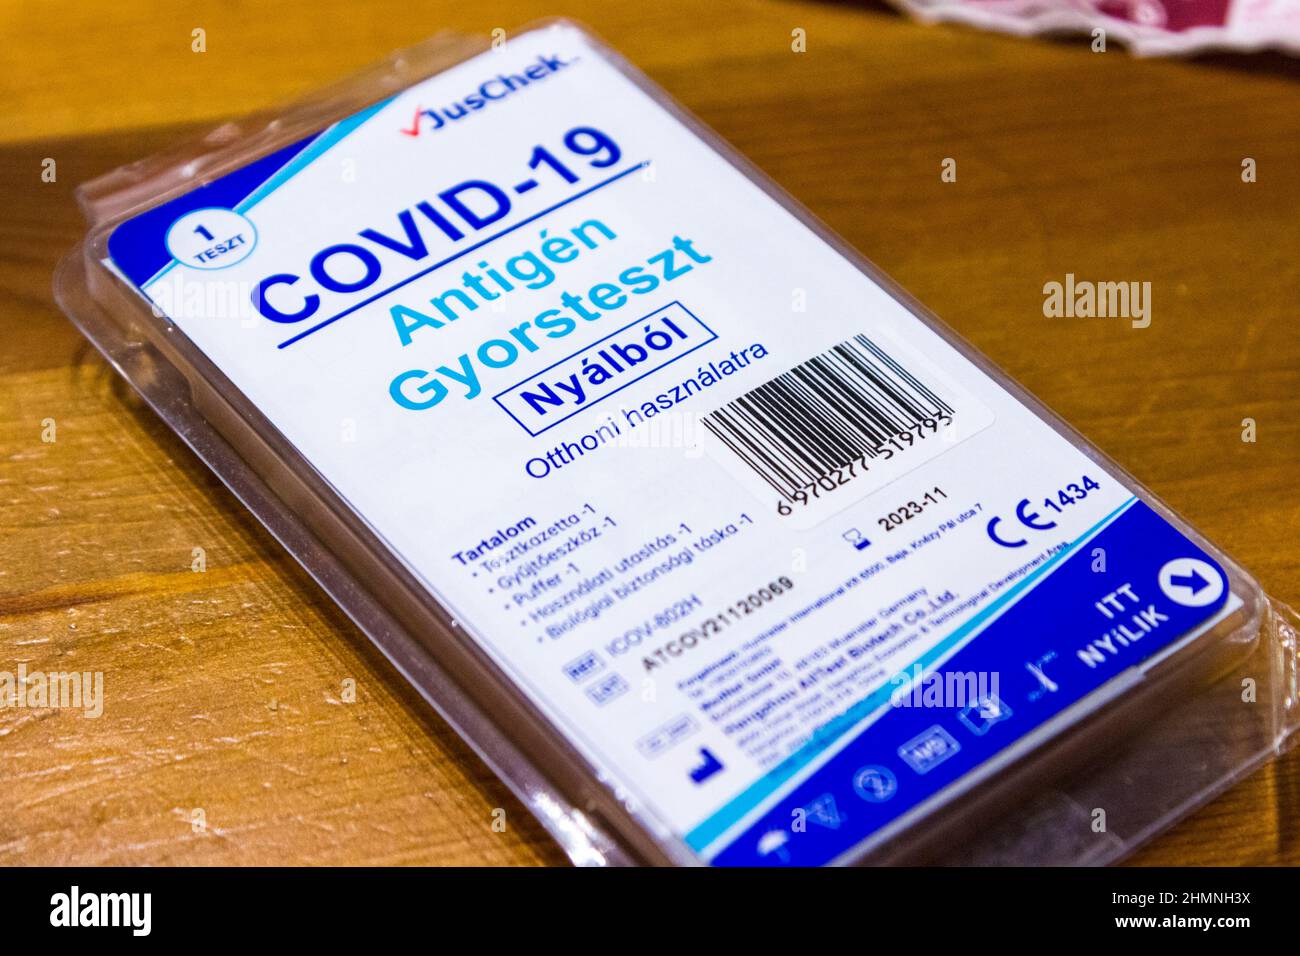 Covid 19 antigen rapid test kit with positive result for infection.  Coronavirus rapid self-test home kit close-up image Stock Photo - Alamy